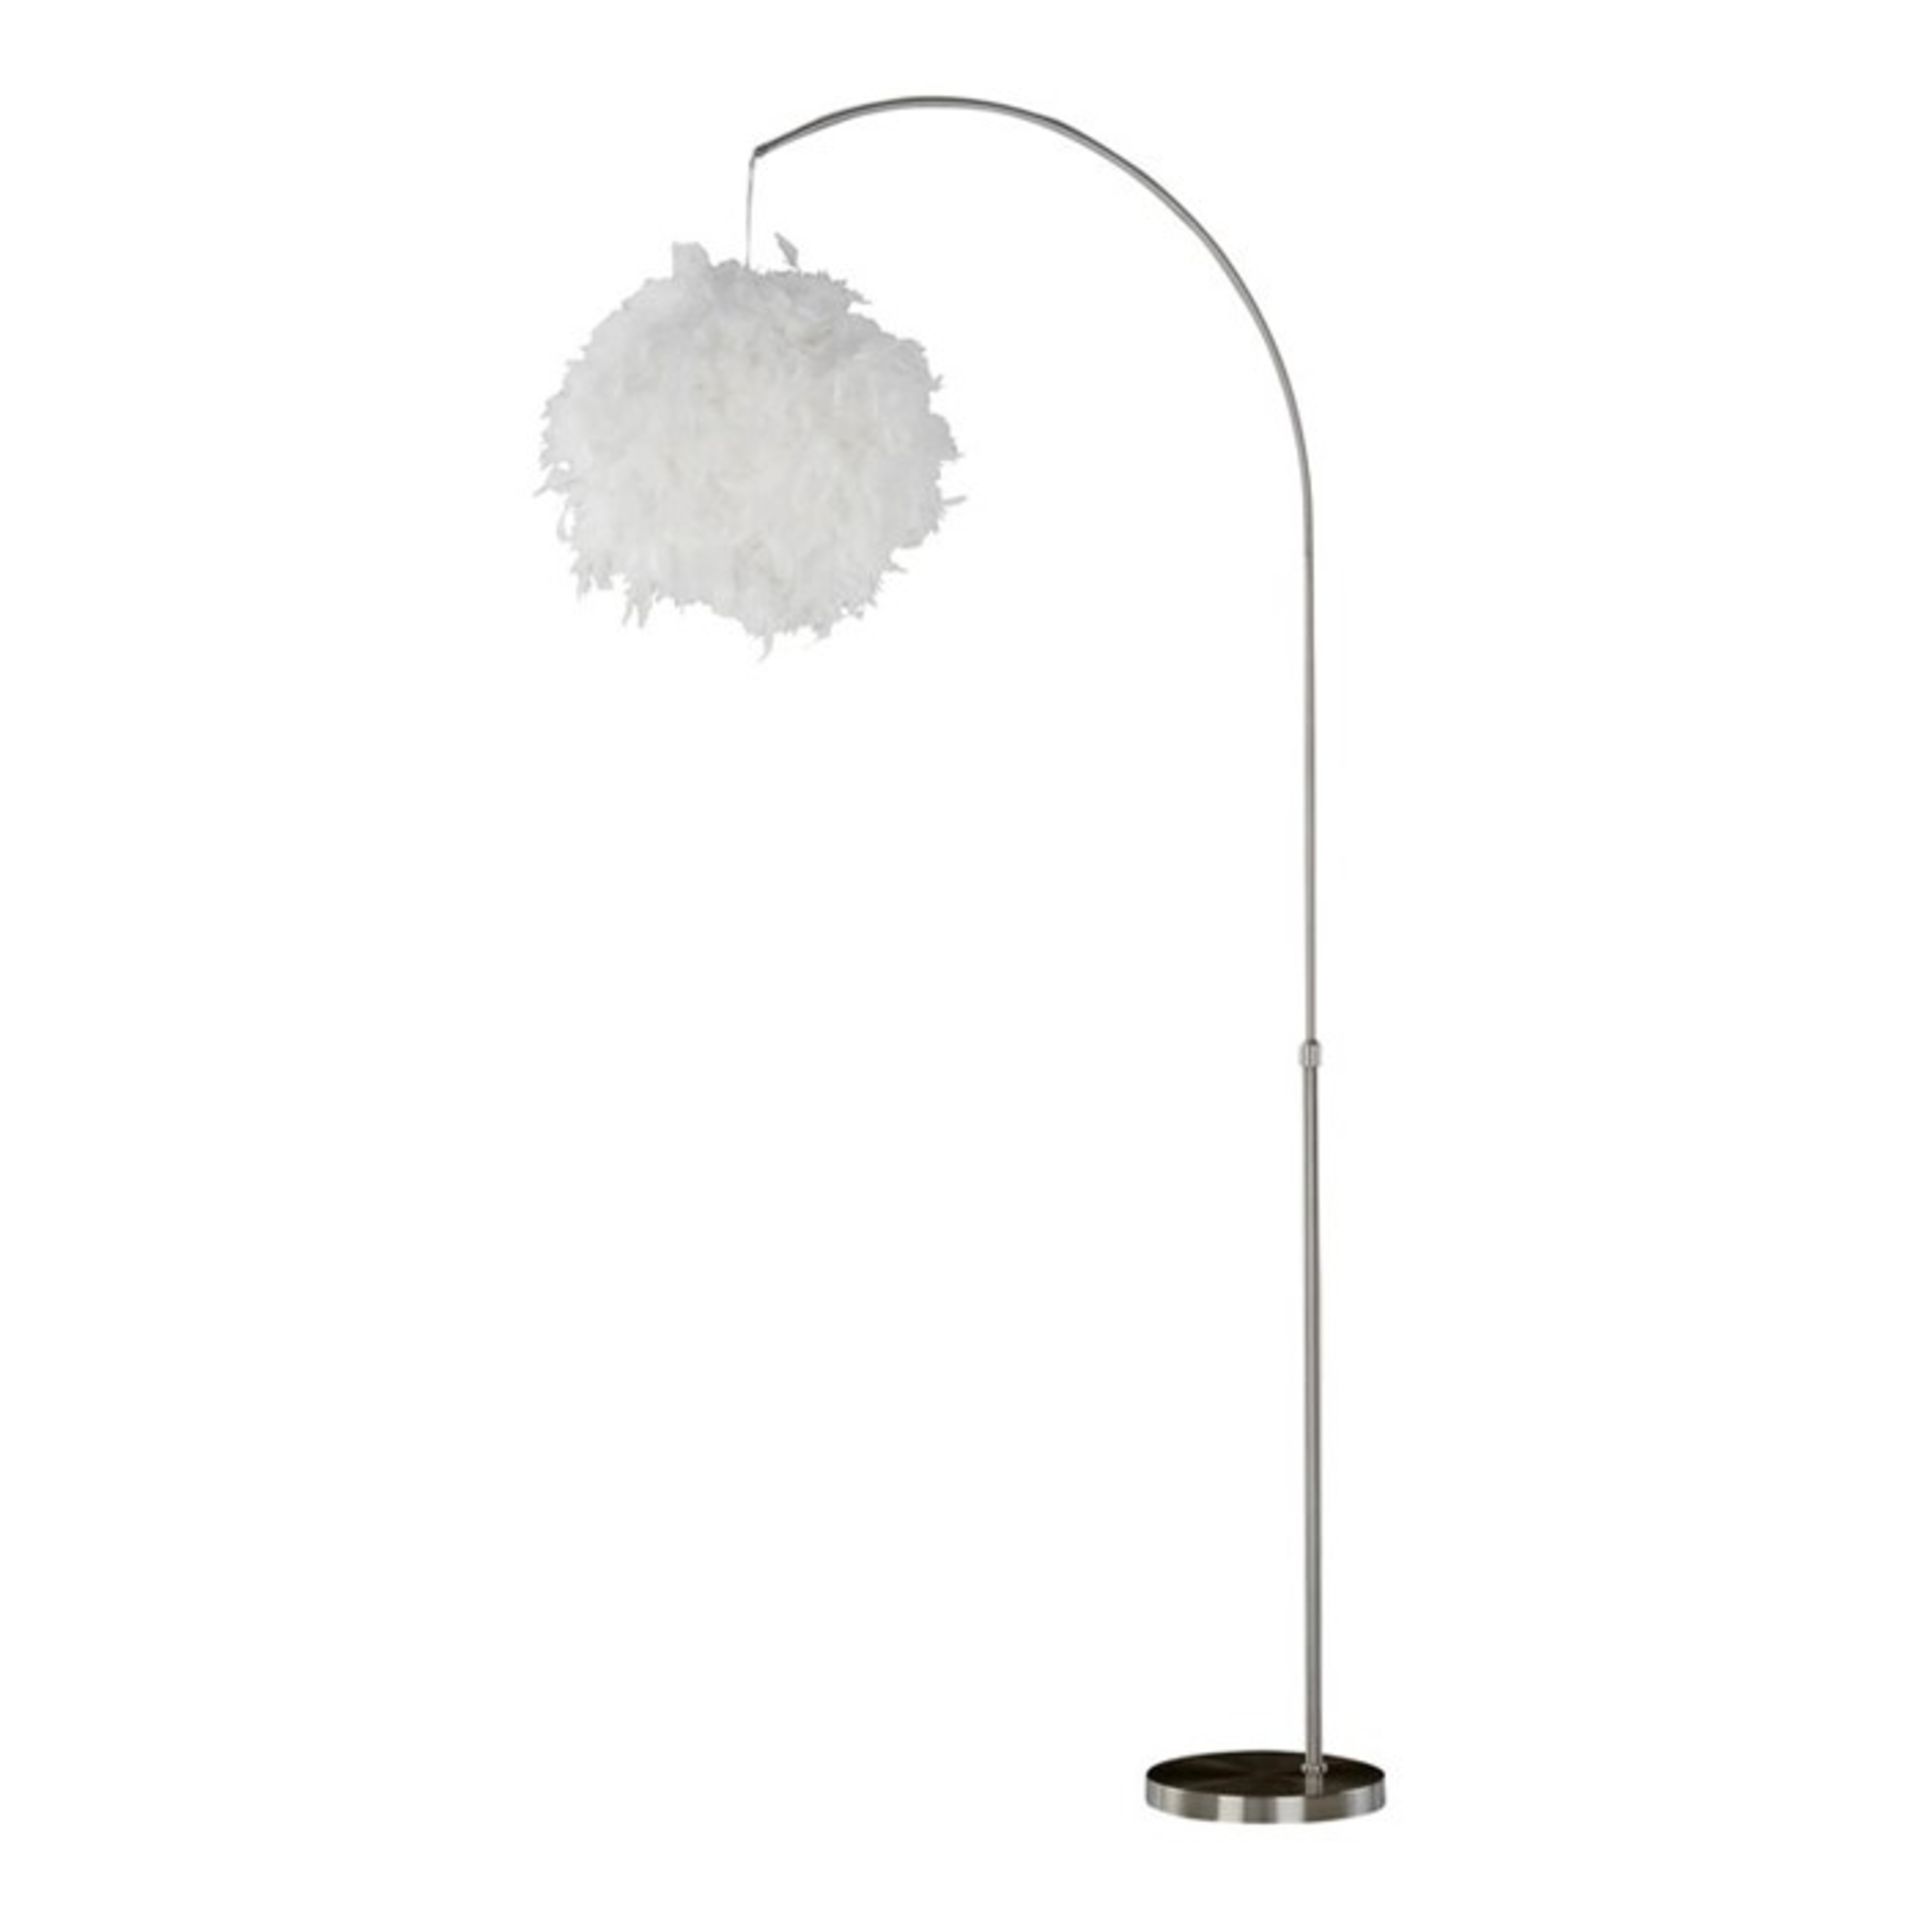 Hashtag Home,196cm Arched Lamp - RRP £71.99 (DNOR8926 -18550/42) 1B